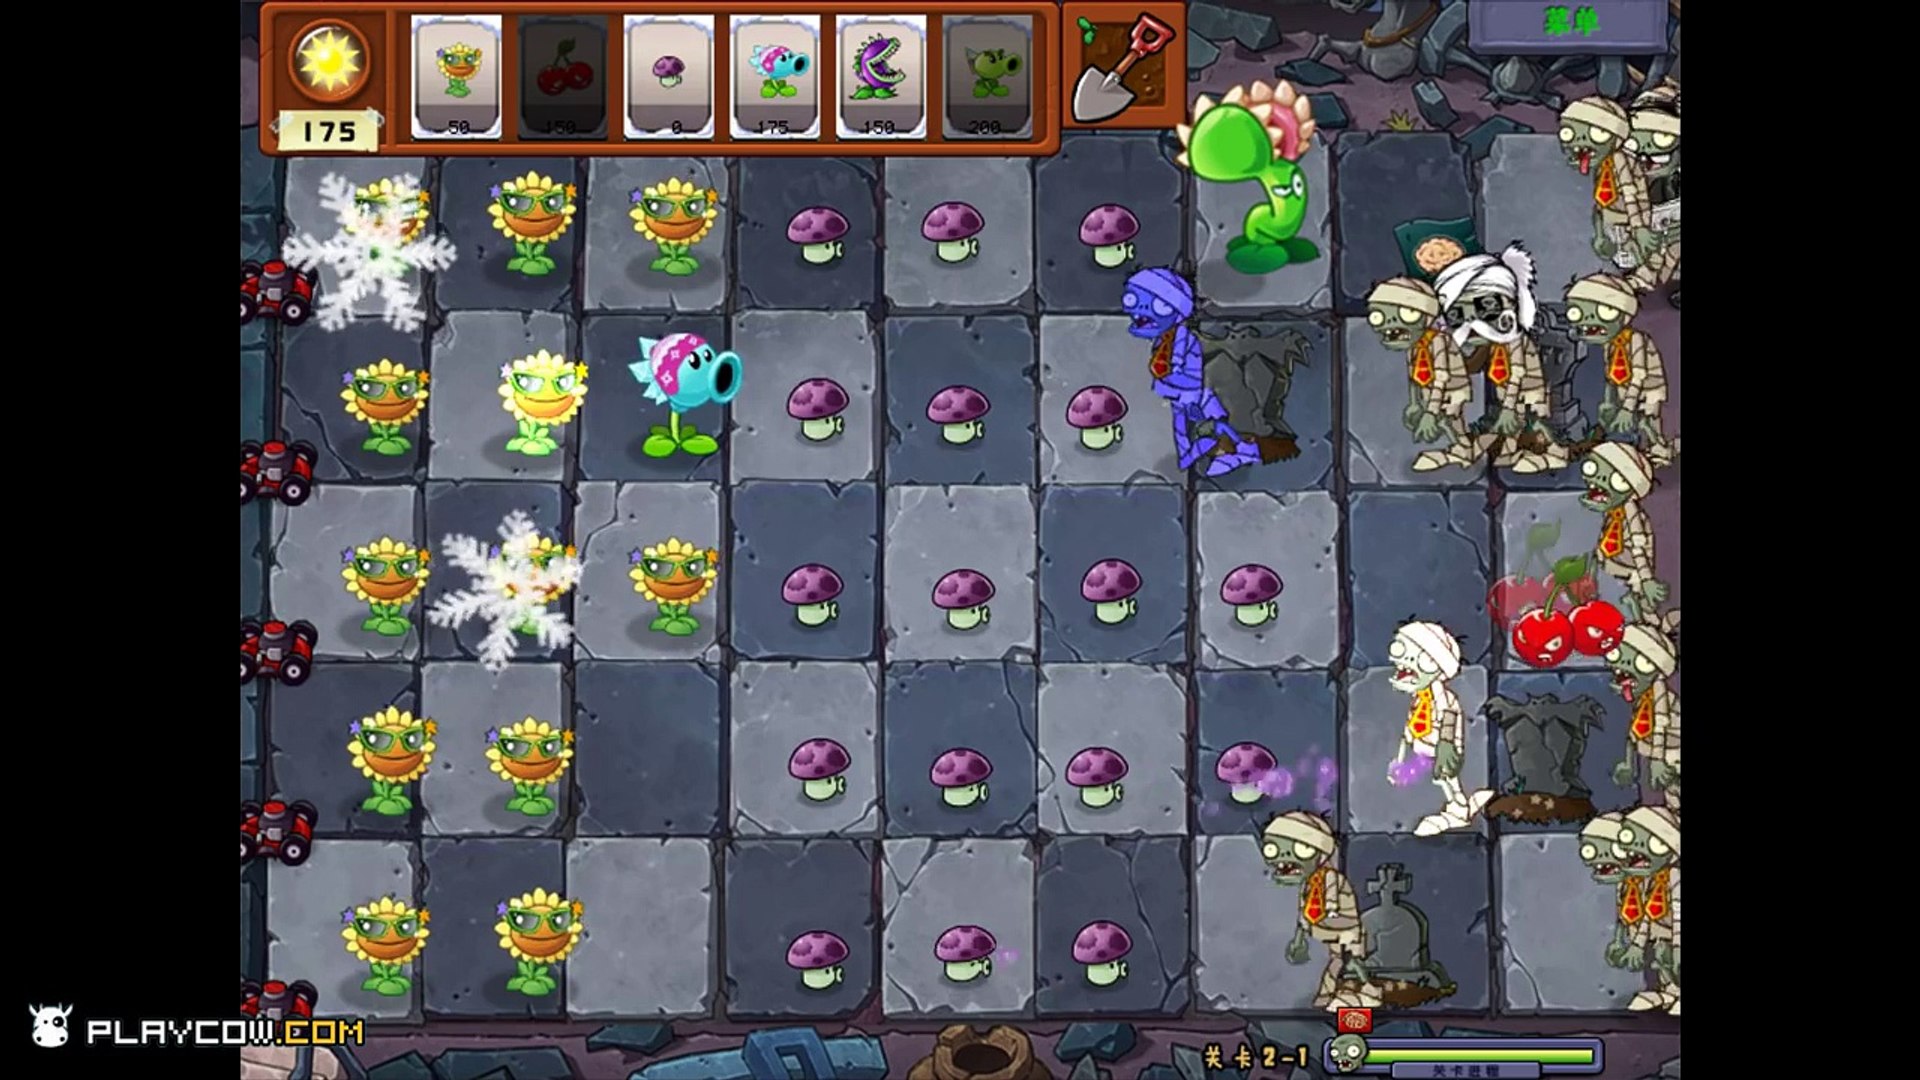 Plant vs. Zombies 2 Gameplay Trailer 